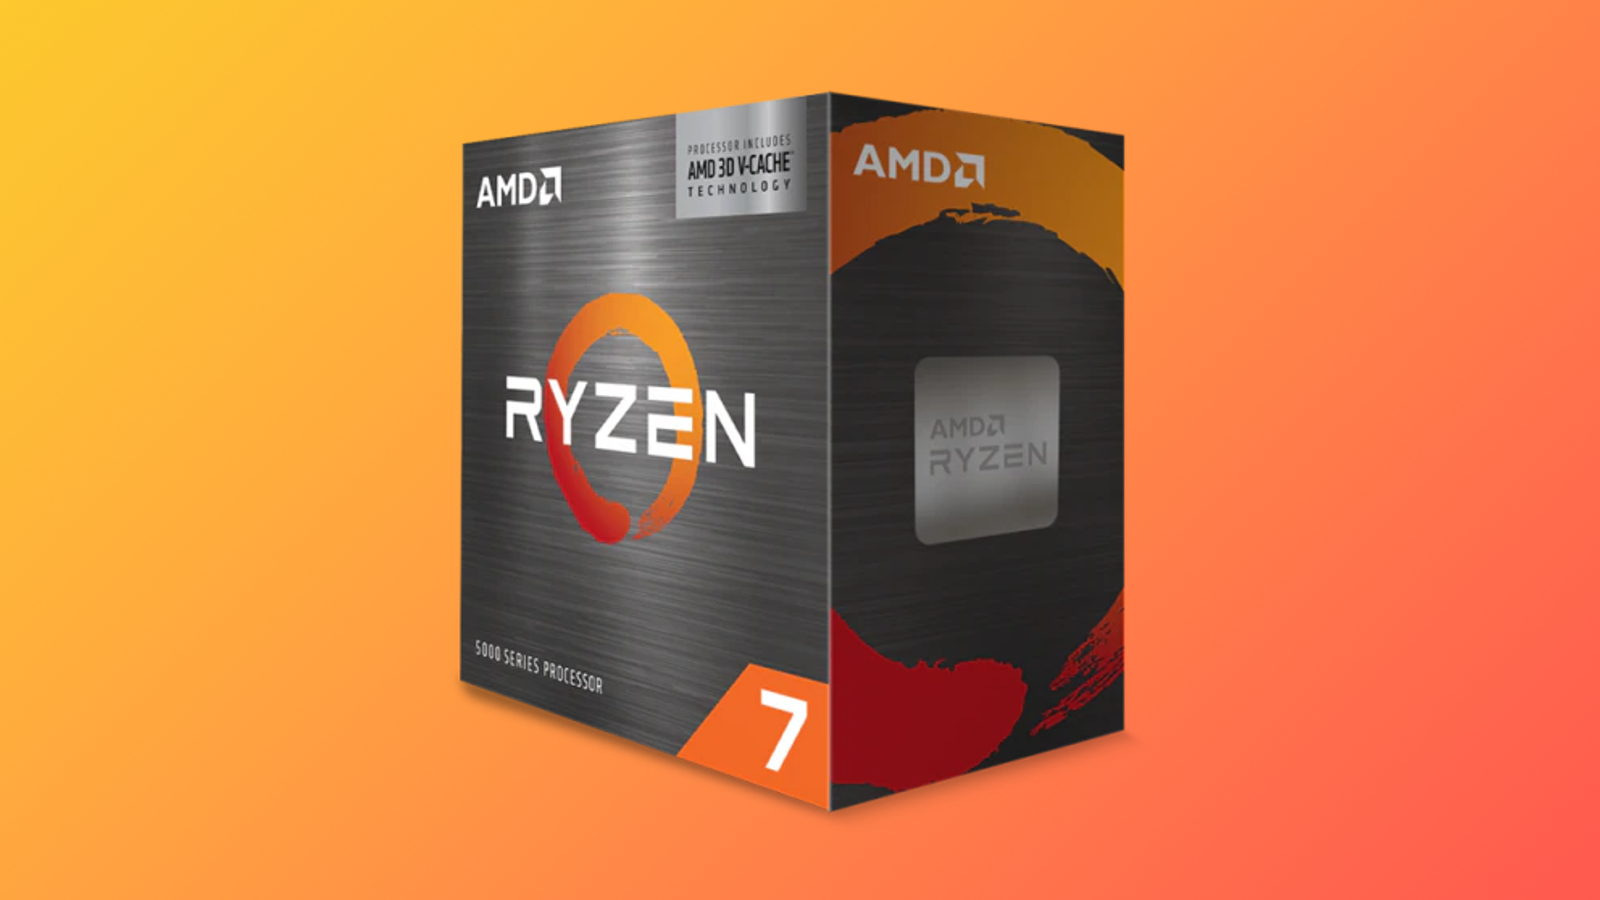 AMD Ryzen 7 5800X3D, The World's First 3D V-Cache & Fastest Gaming